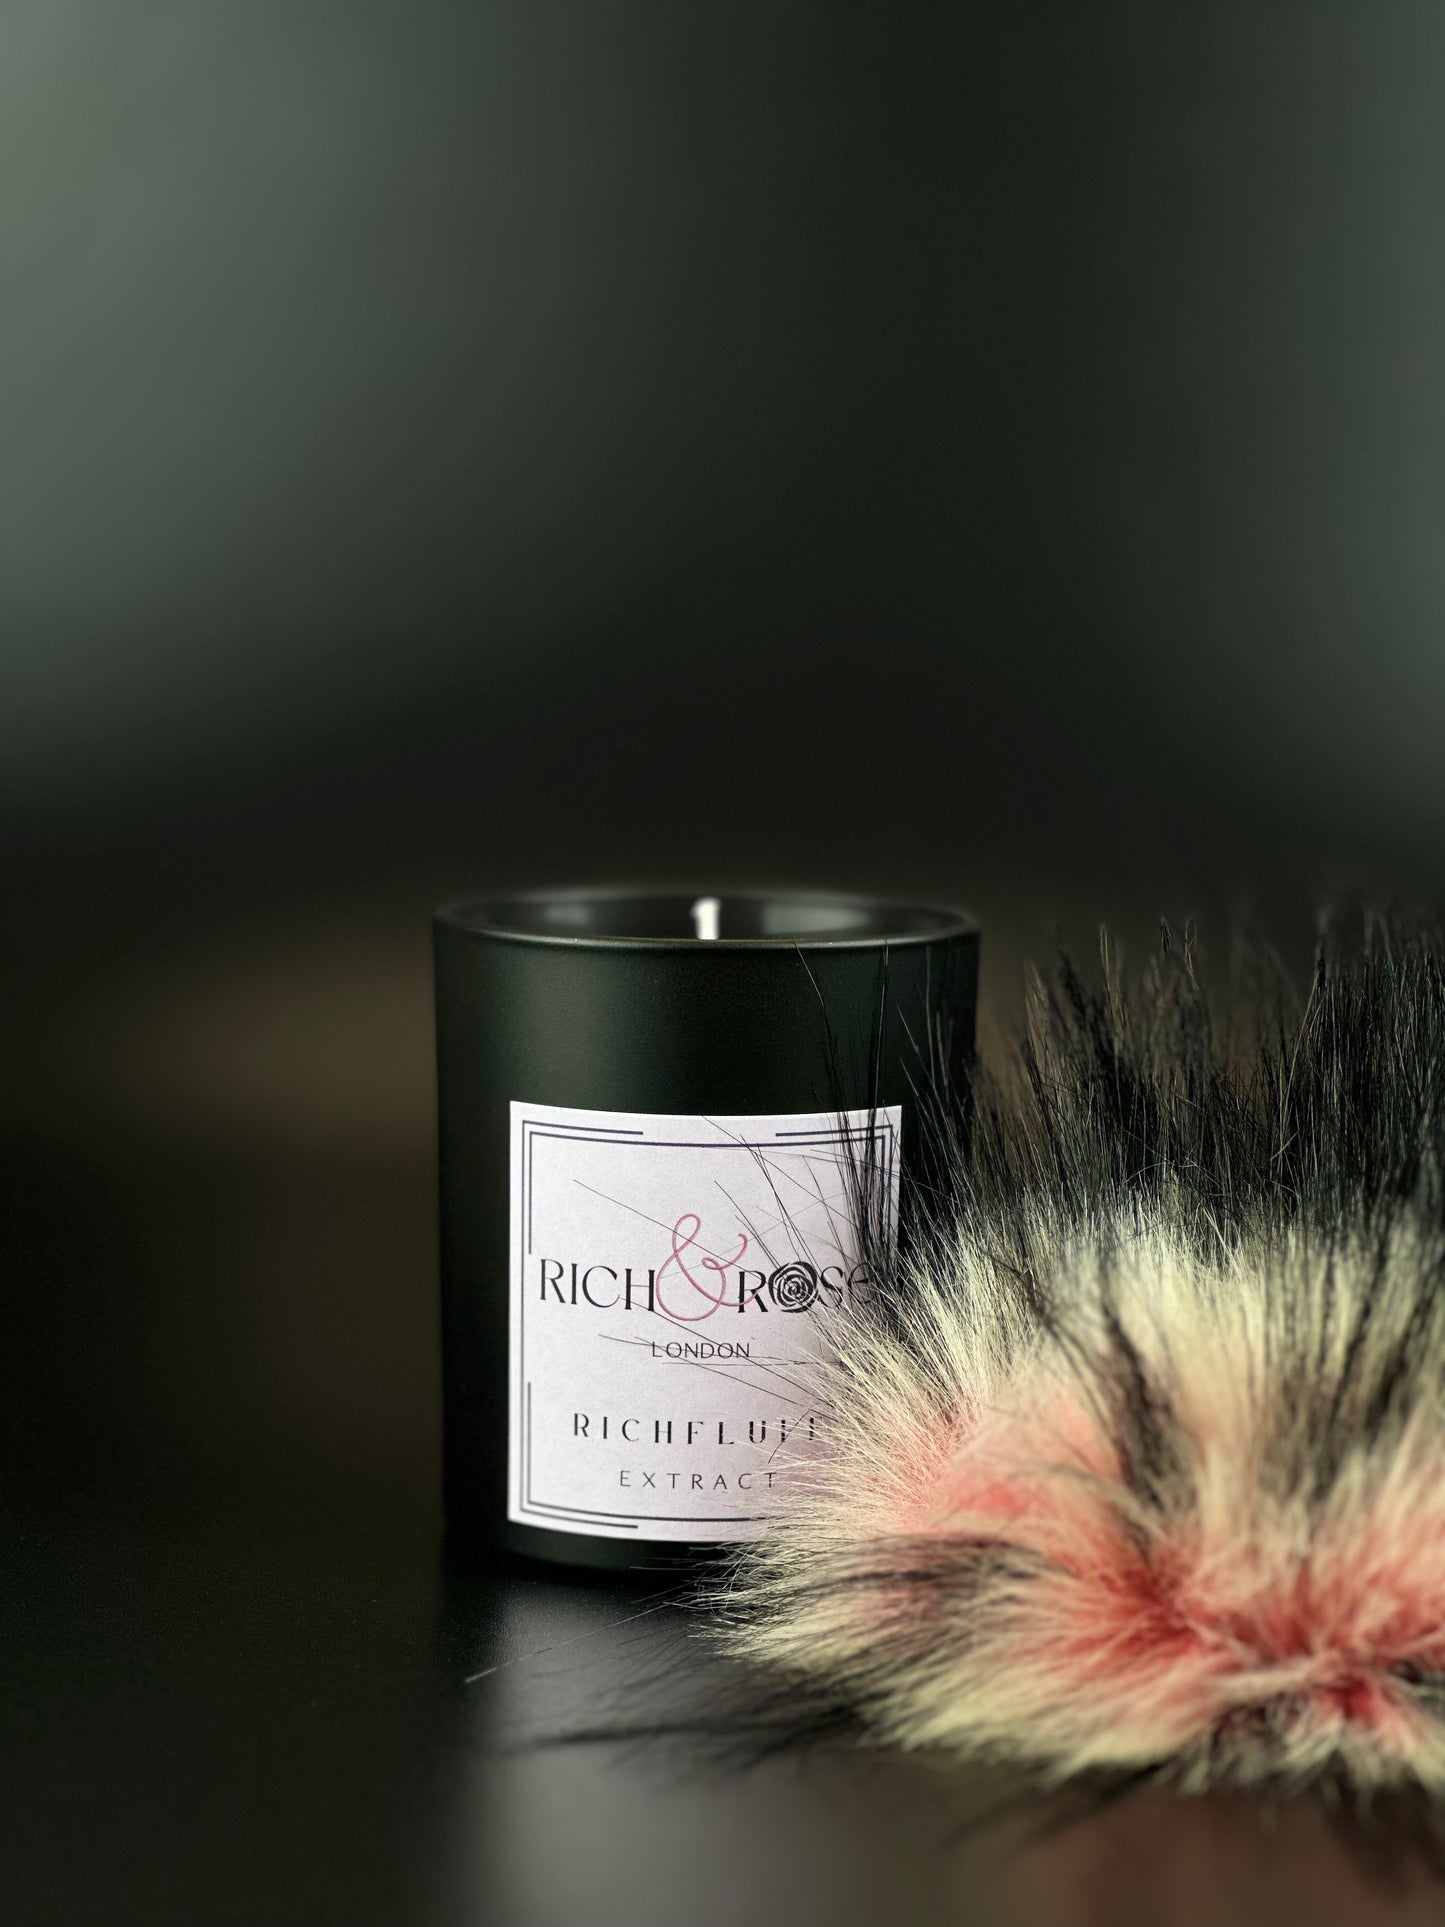 Fluffy gift, faux fur, lion gift, real fur, genuine fur, faux fur , faux fur centre piece, fur interiors, fur decor, faux fur decor, unique gifts for him, unusual gifts, vegan candle, fur gifts, faux fur gift, unique gifts for her ,wolf candle , Beowulf fur, white wolf, fluffy decor, fluffy candle, fluffy interiors.luxury London, London gifts, faux fur gifts, handmade luxury,